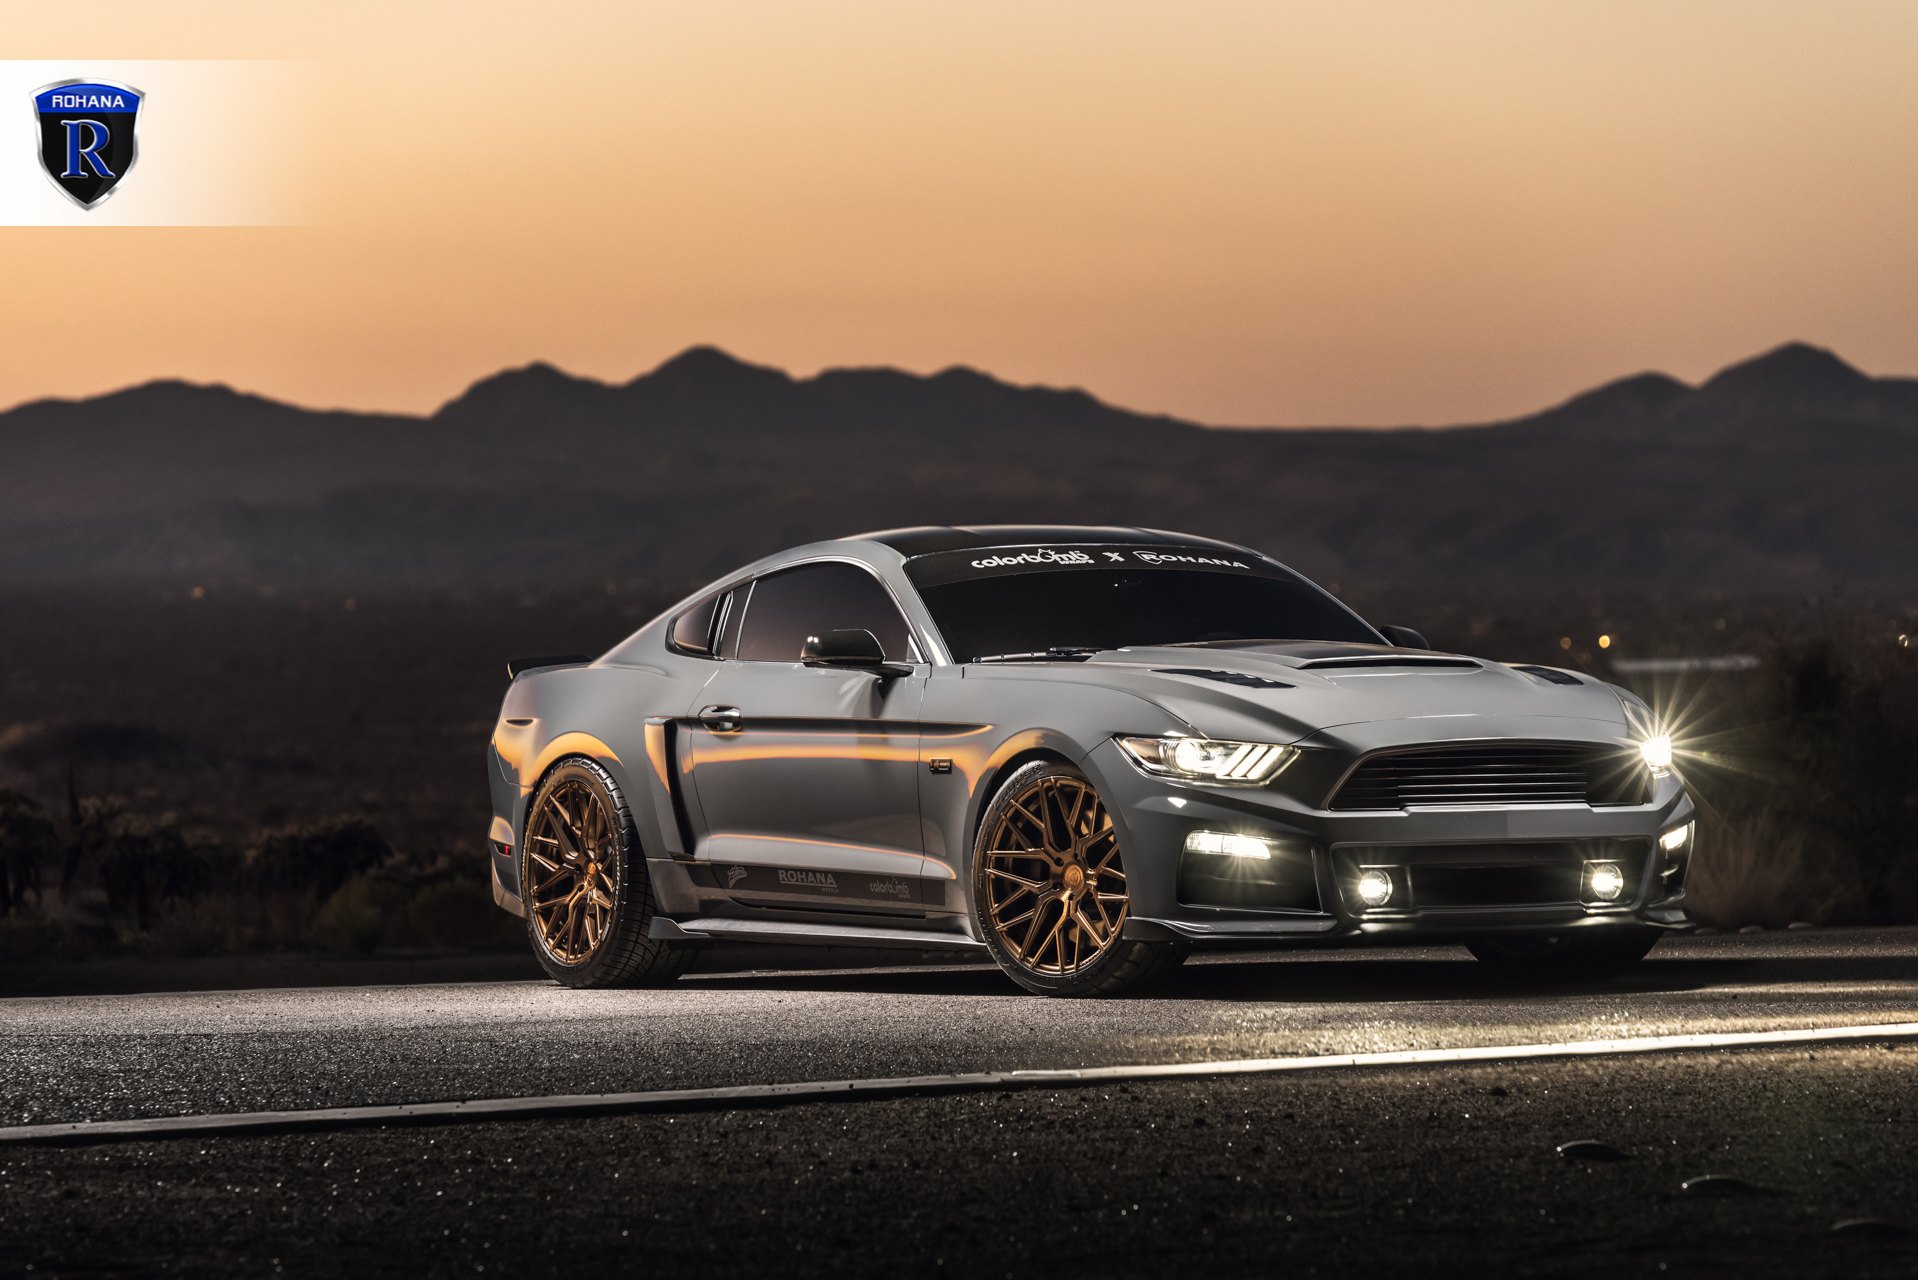 Aftermarket LED Headlights on Gray Ford Mustang - Photo by Rohana Wheels